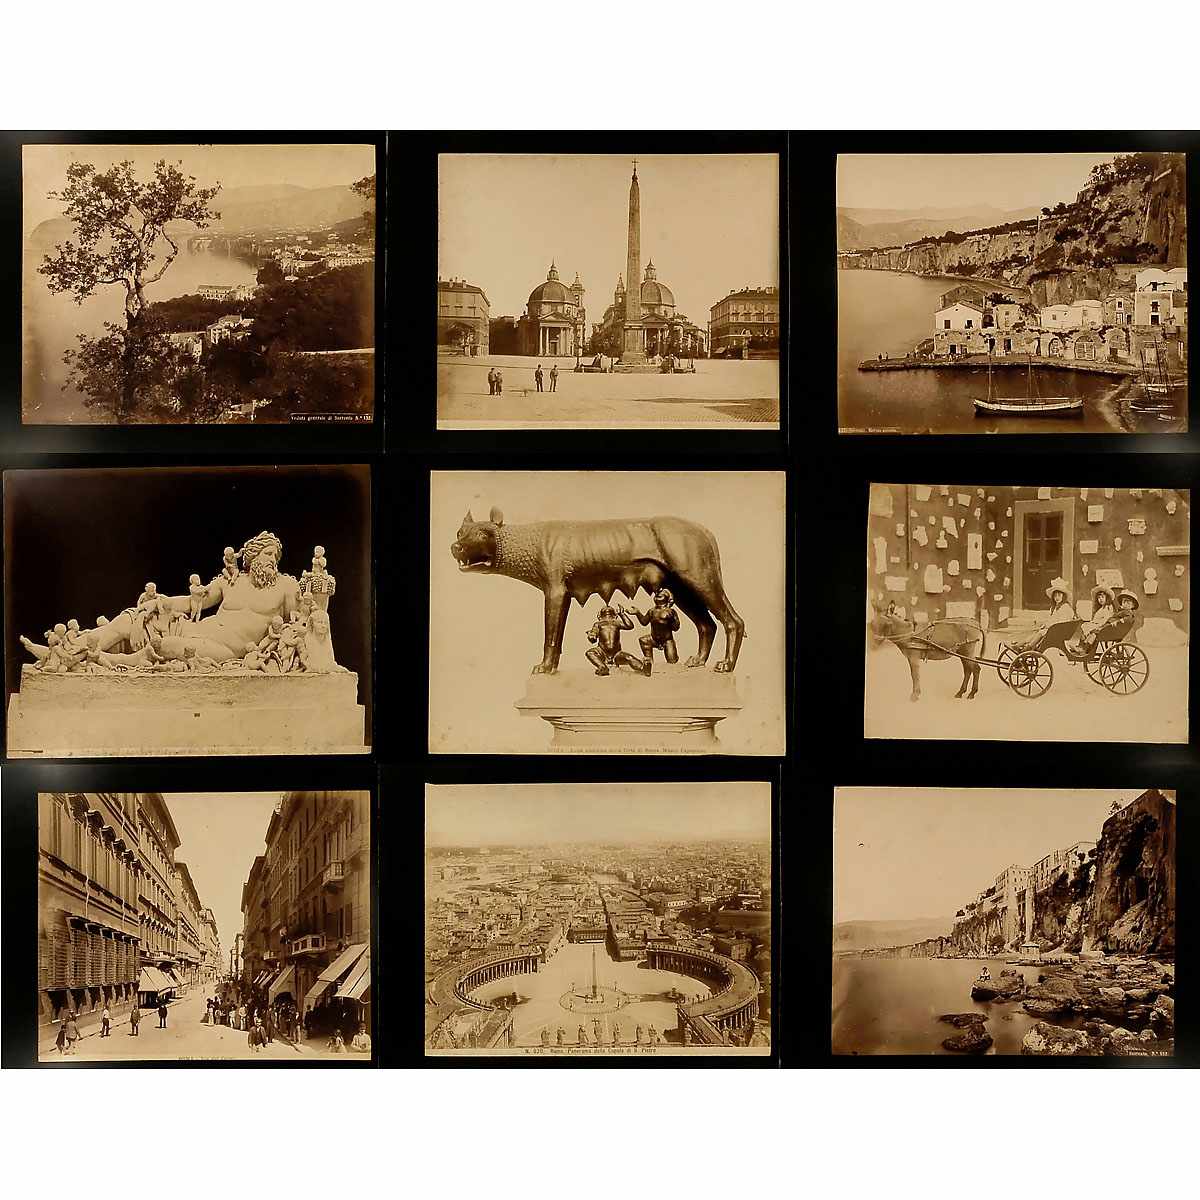 Approx. 160 Original Vintage Pictures for Viewer, c. 1880-1900 External dimension 9 ½ x 13 in., - Image 2 of 6